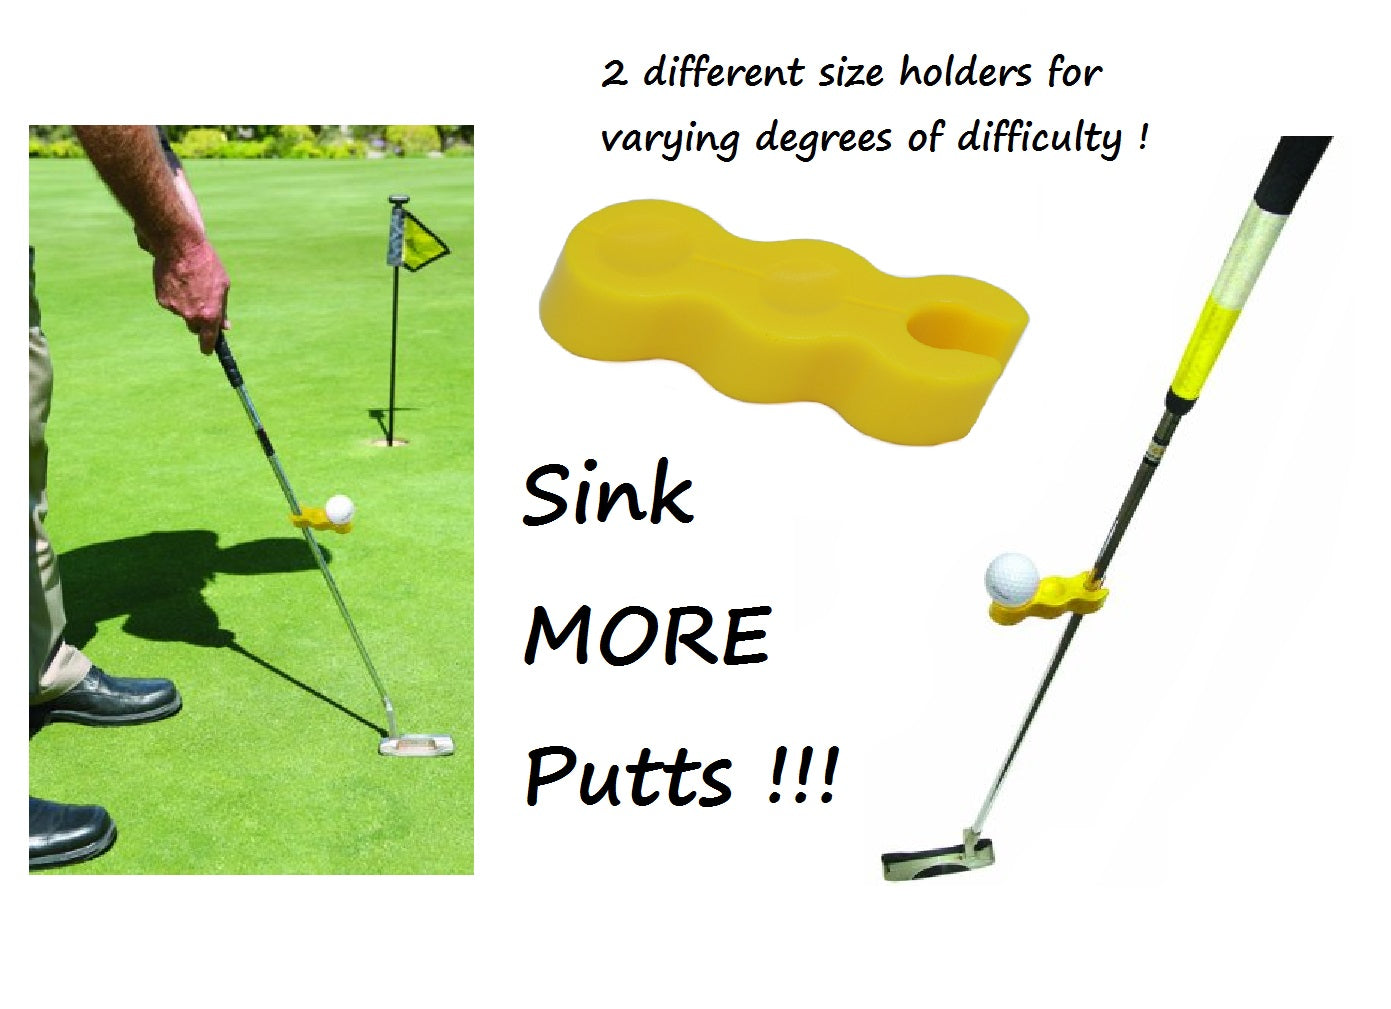 Golf Putter / Putting Training Aid - Tempo Tray - Trainer - Swing - Practice -